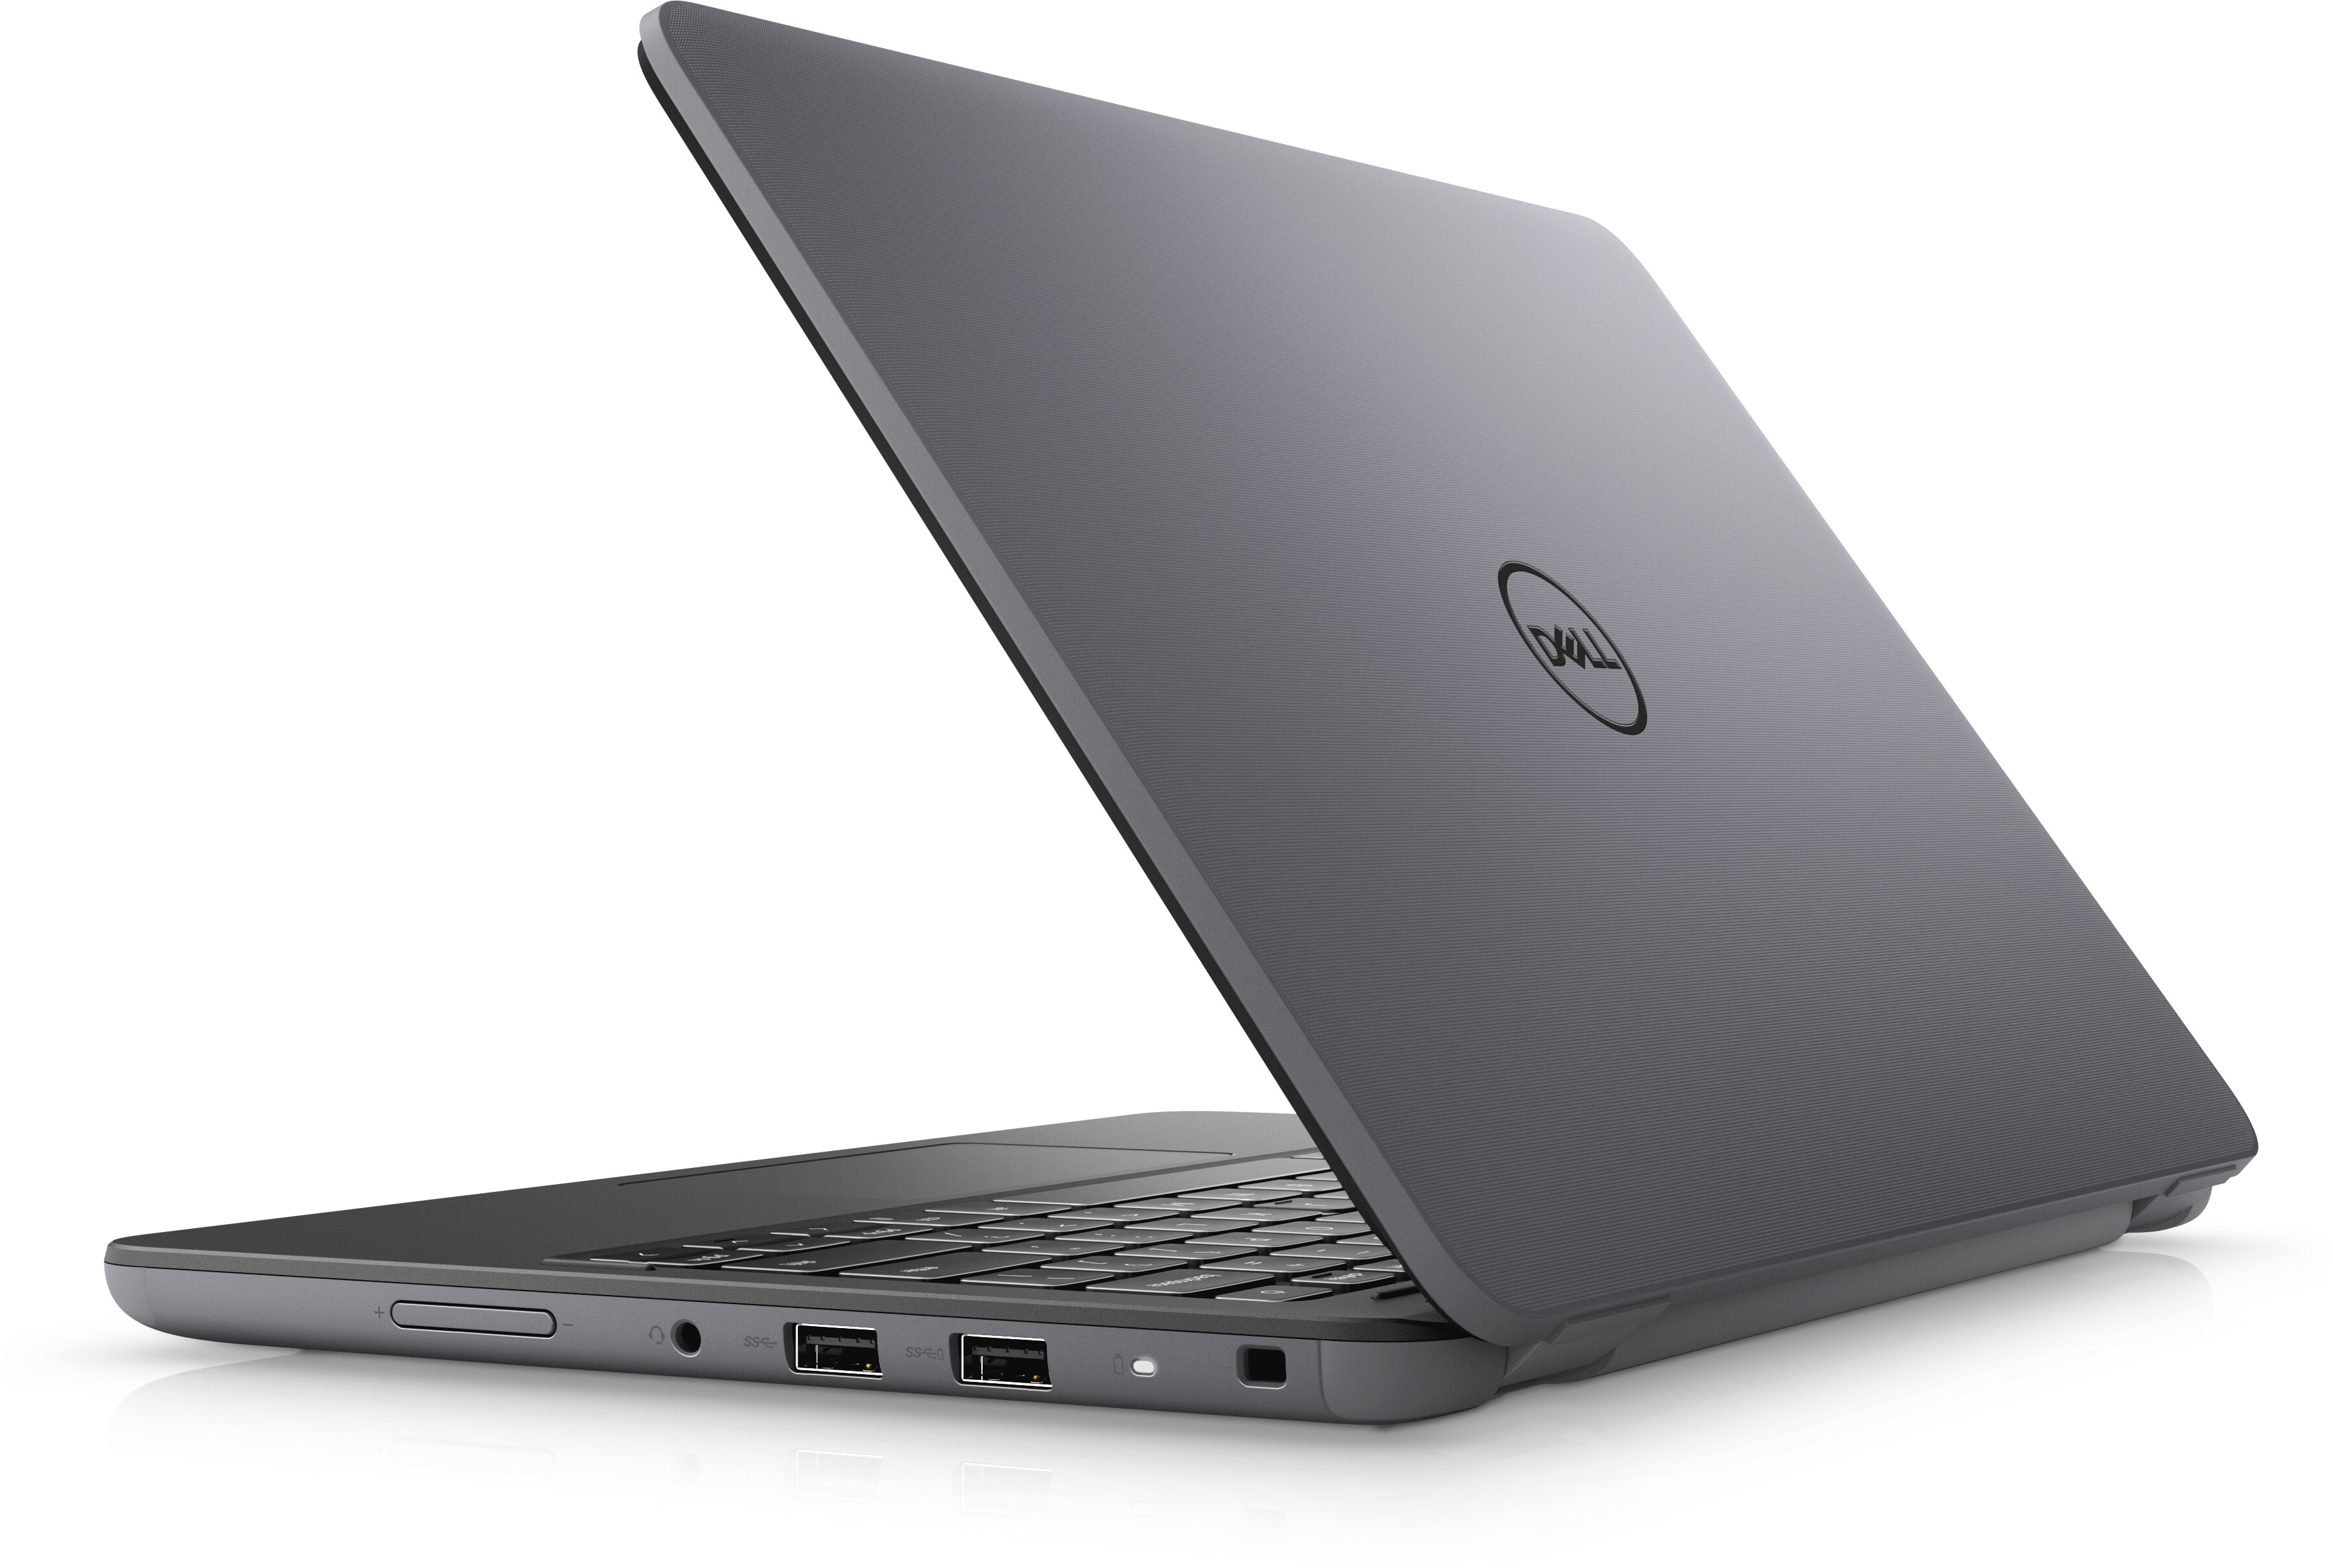 Dell Latitude 3140 Touchscreen Laptop or 2-in-1 for Students